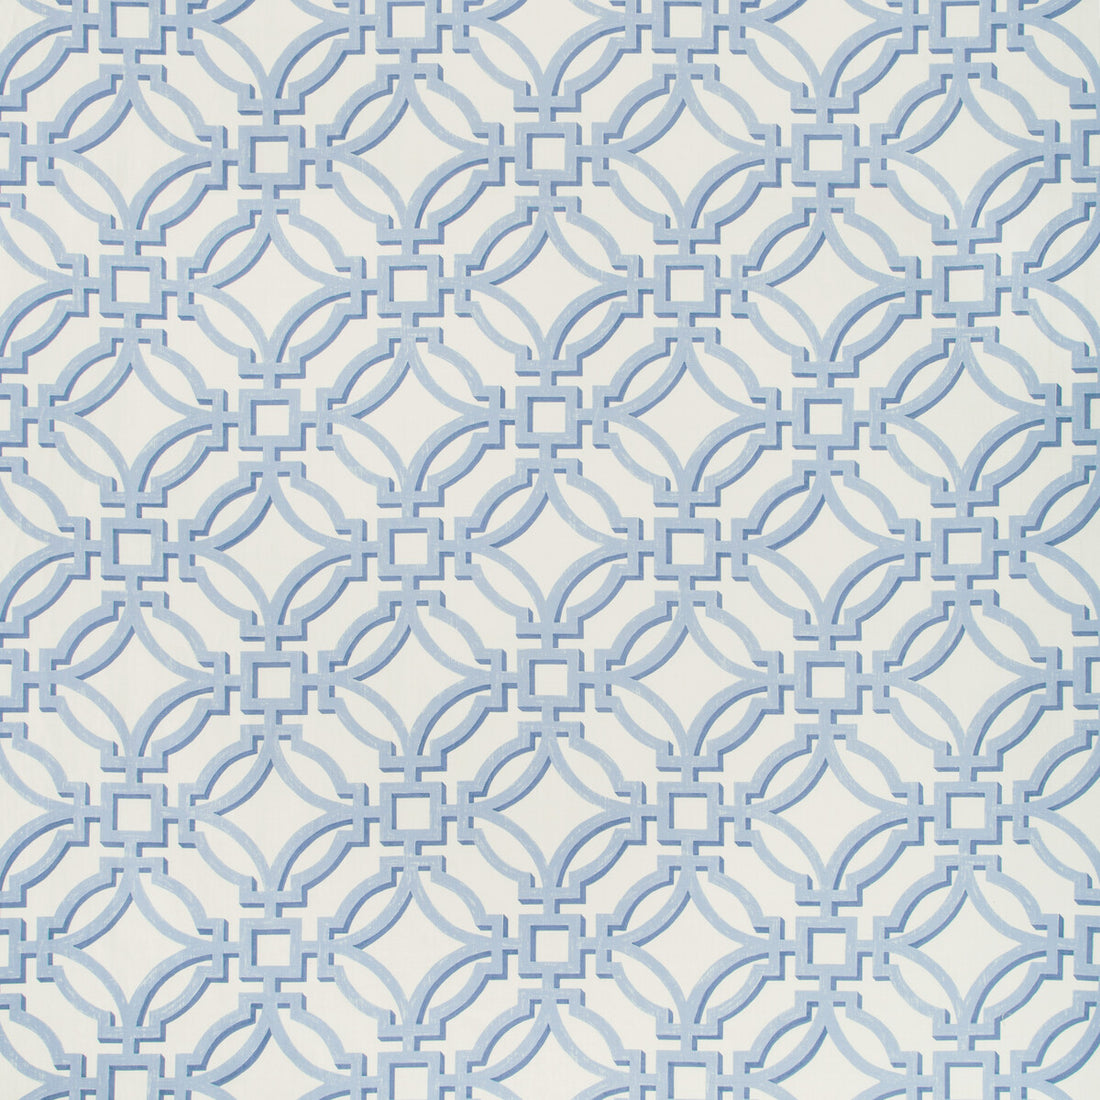 Salvy Print fabric in delft color - pattern 8019136.15.0 - by Brunschwig &amp; Fils in the Summer Palace collection